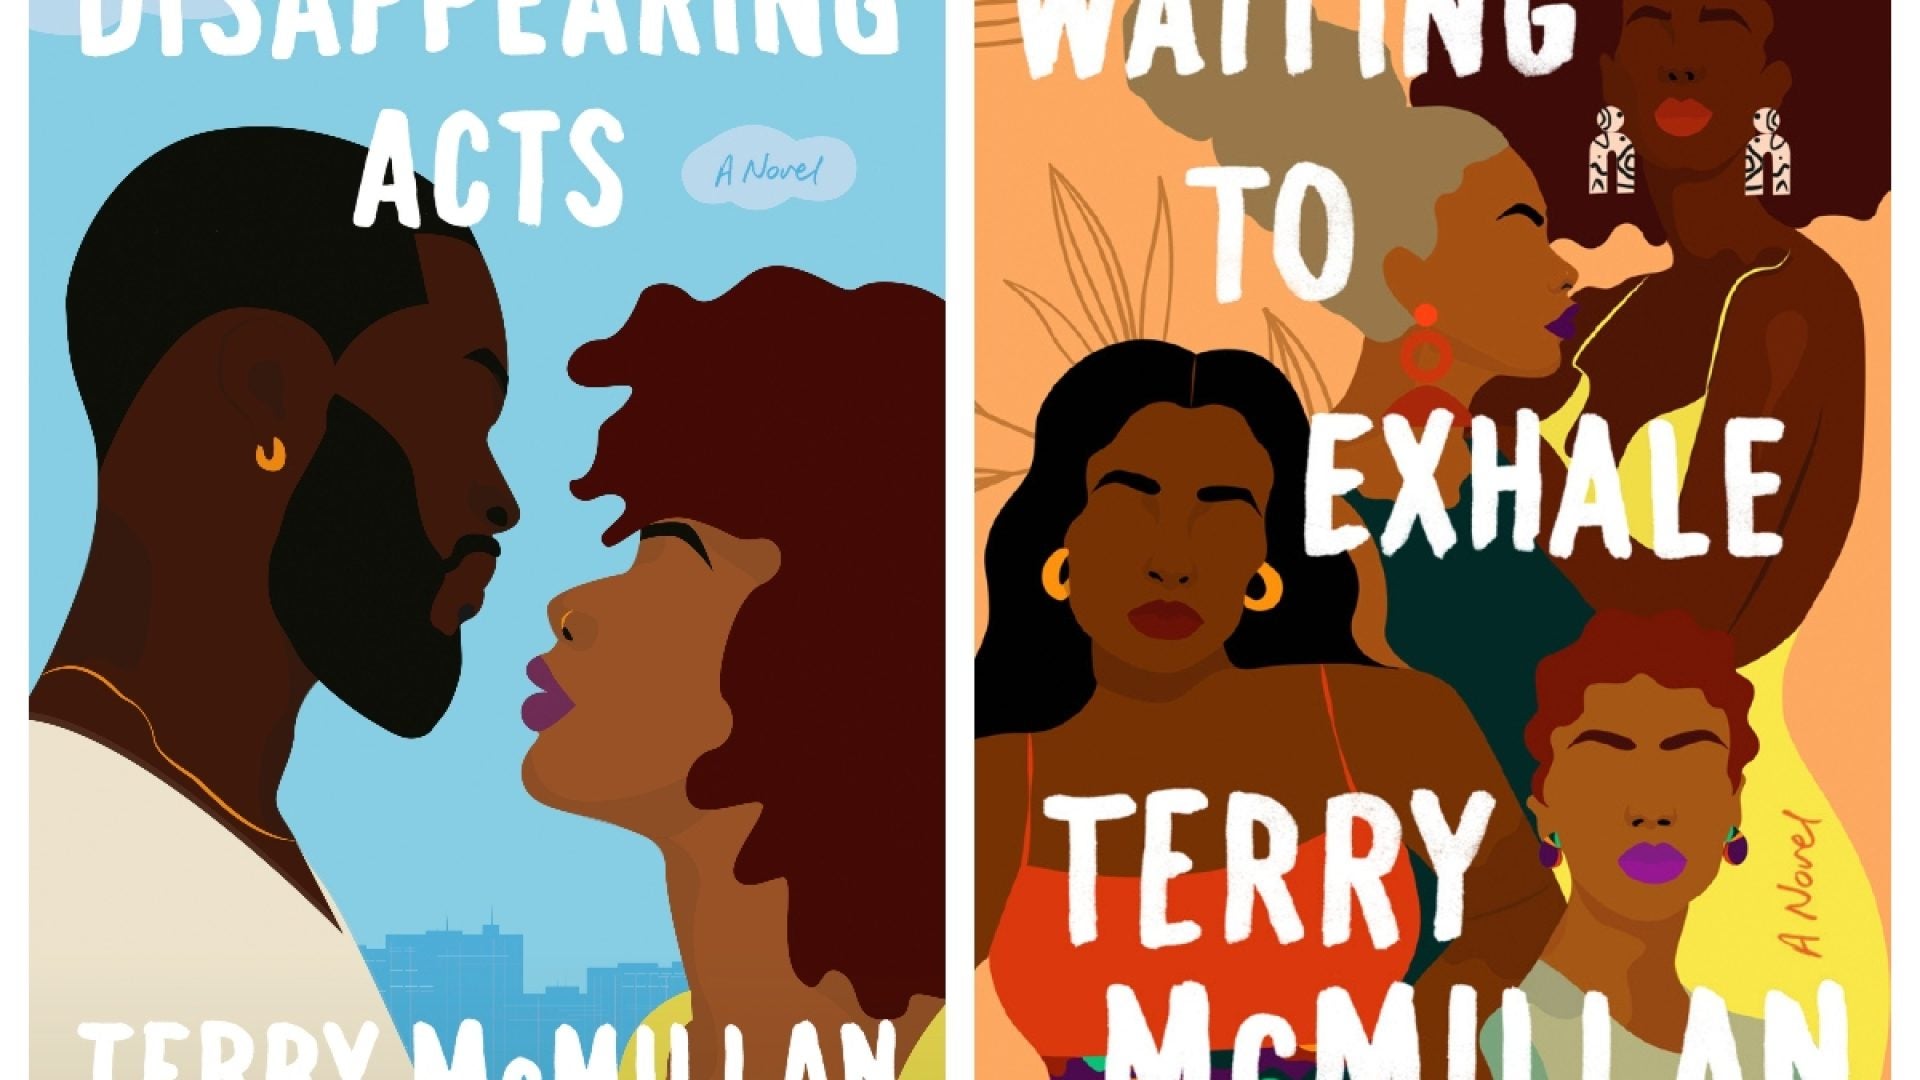 8 Of Terry McMillian's Iconic Novels Get New Covers